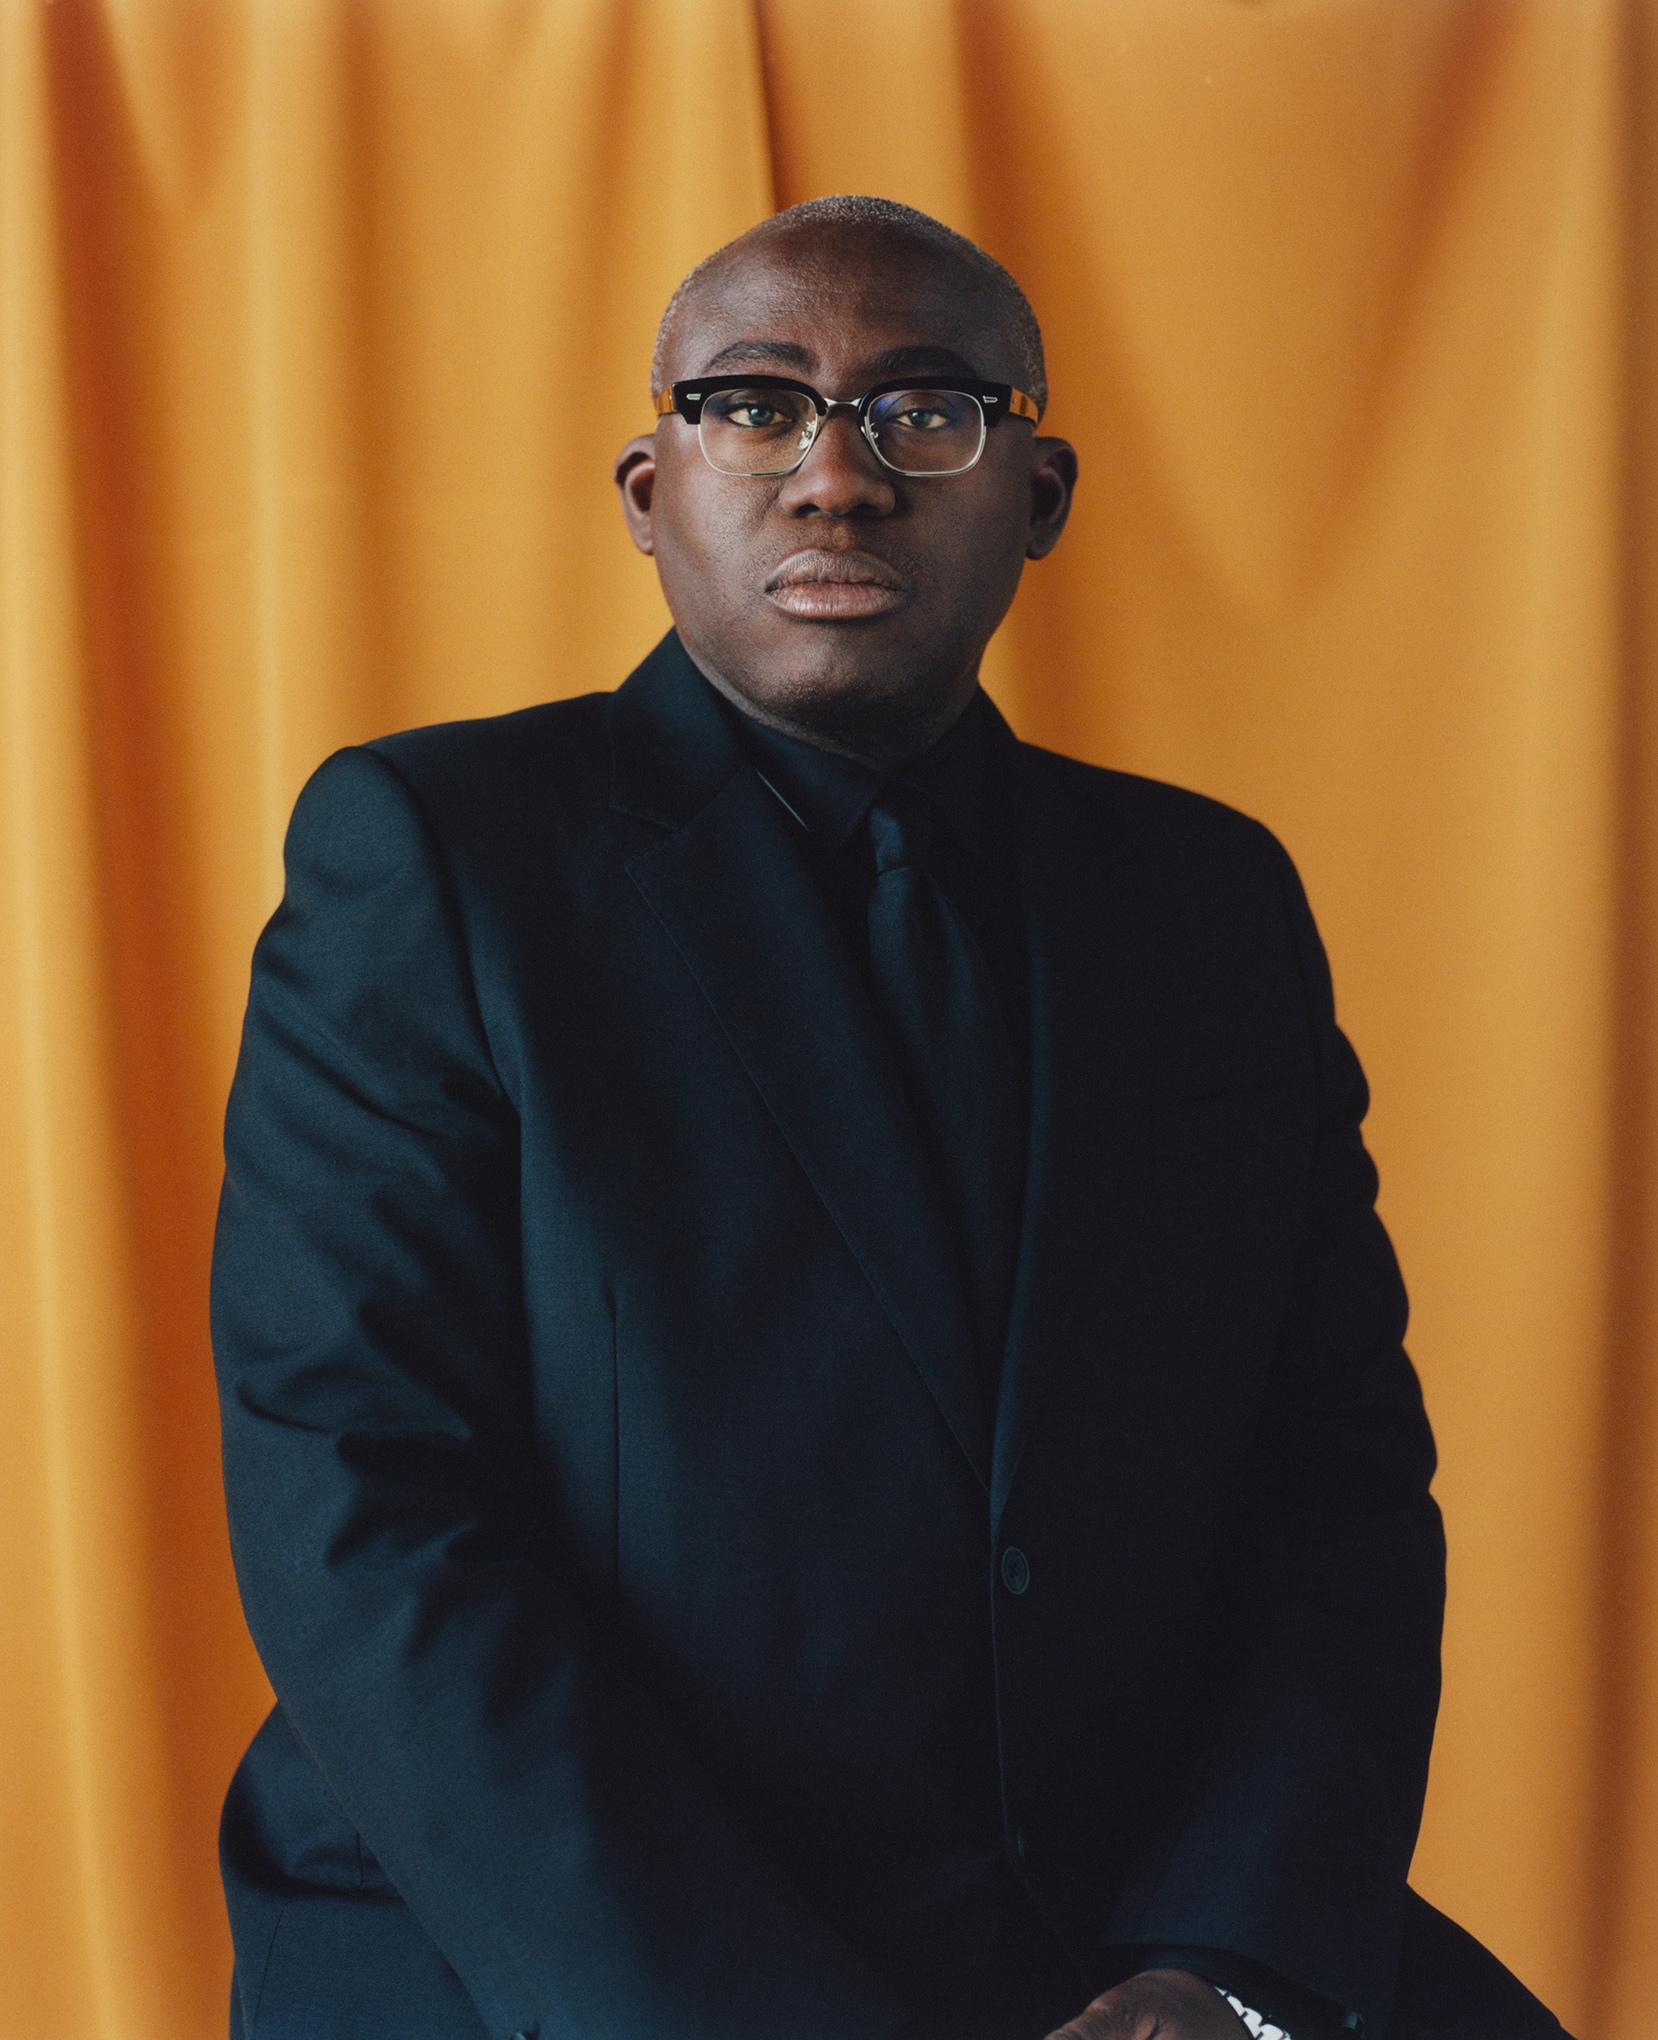 British Vogue editor in chief Enninful in Ladbroke Grove, London, on Aug. 31. (Campbell Addy for TIME)